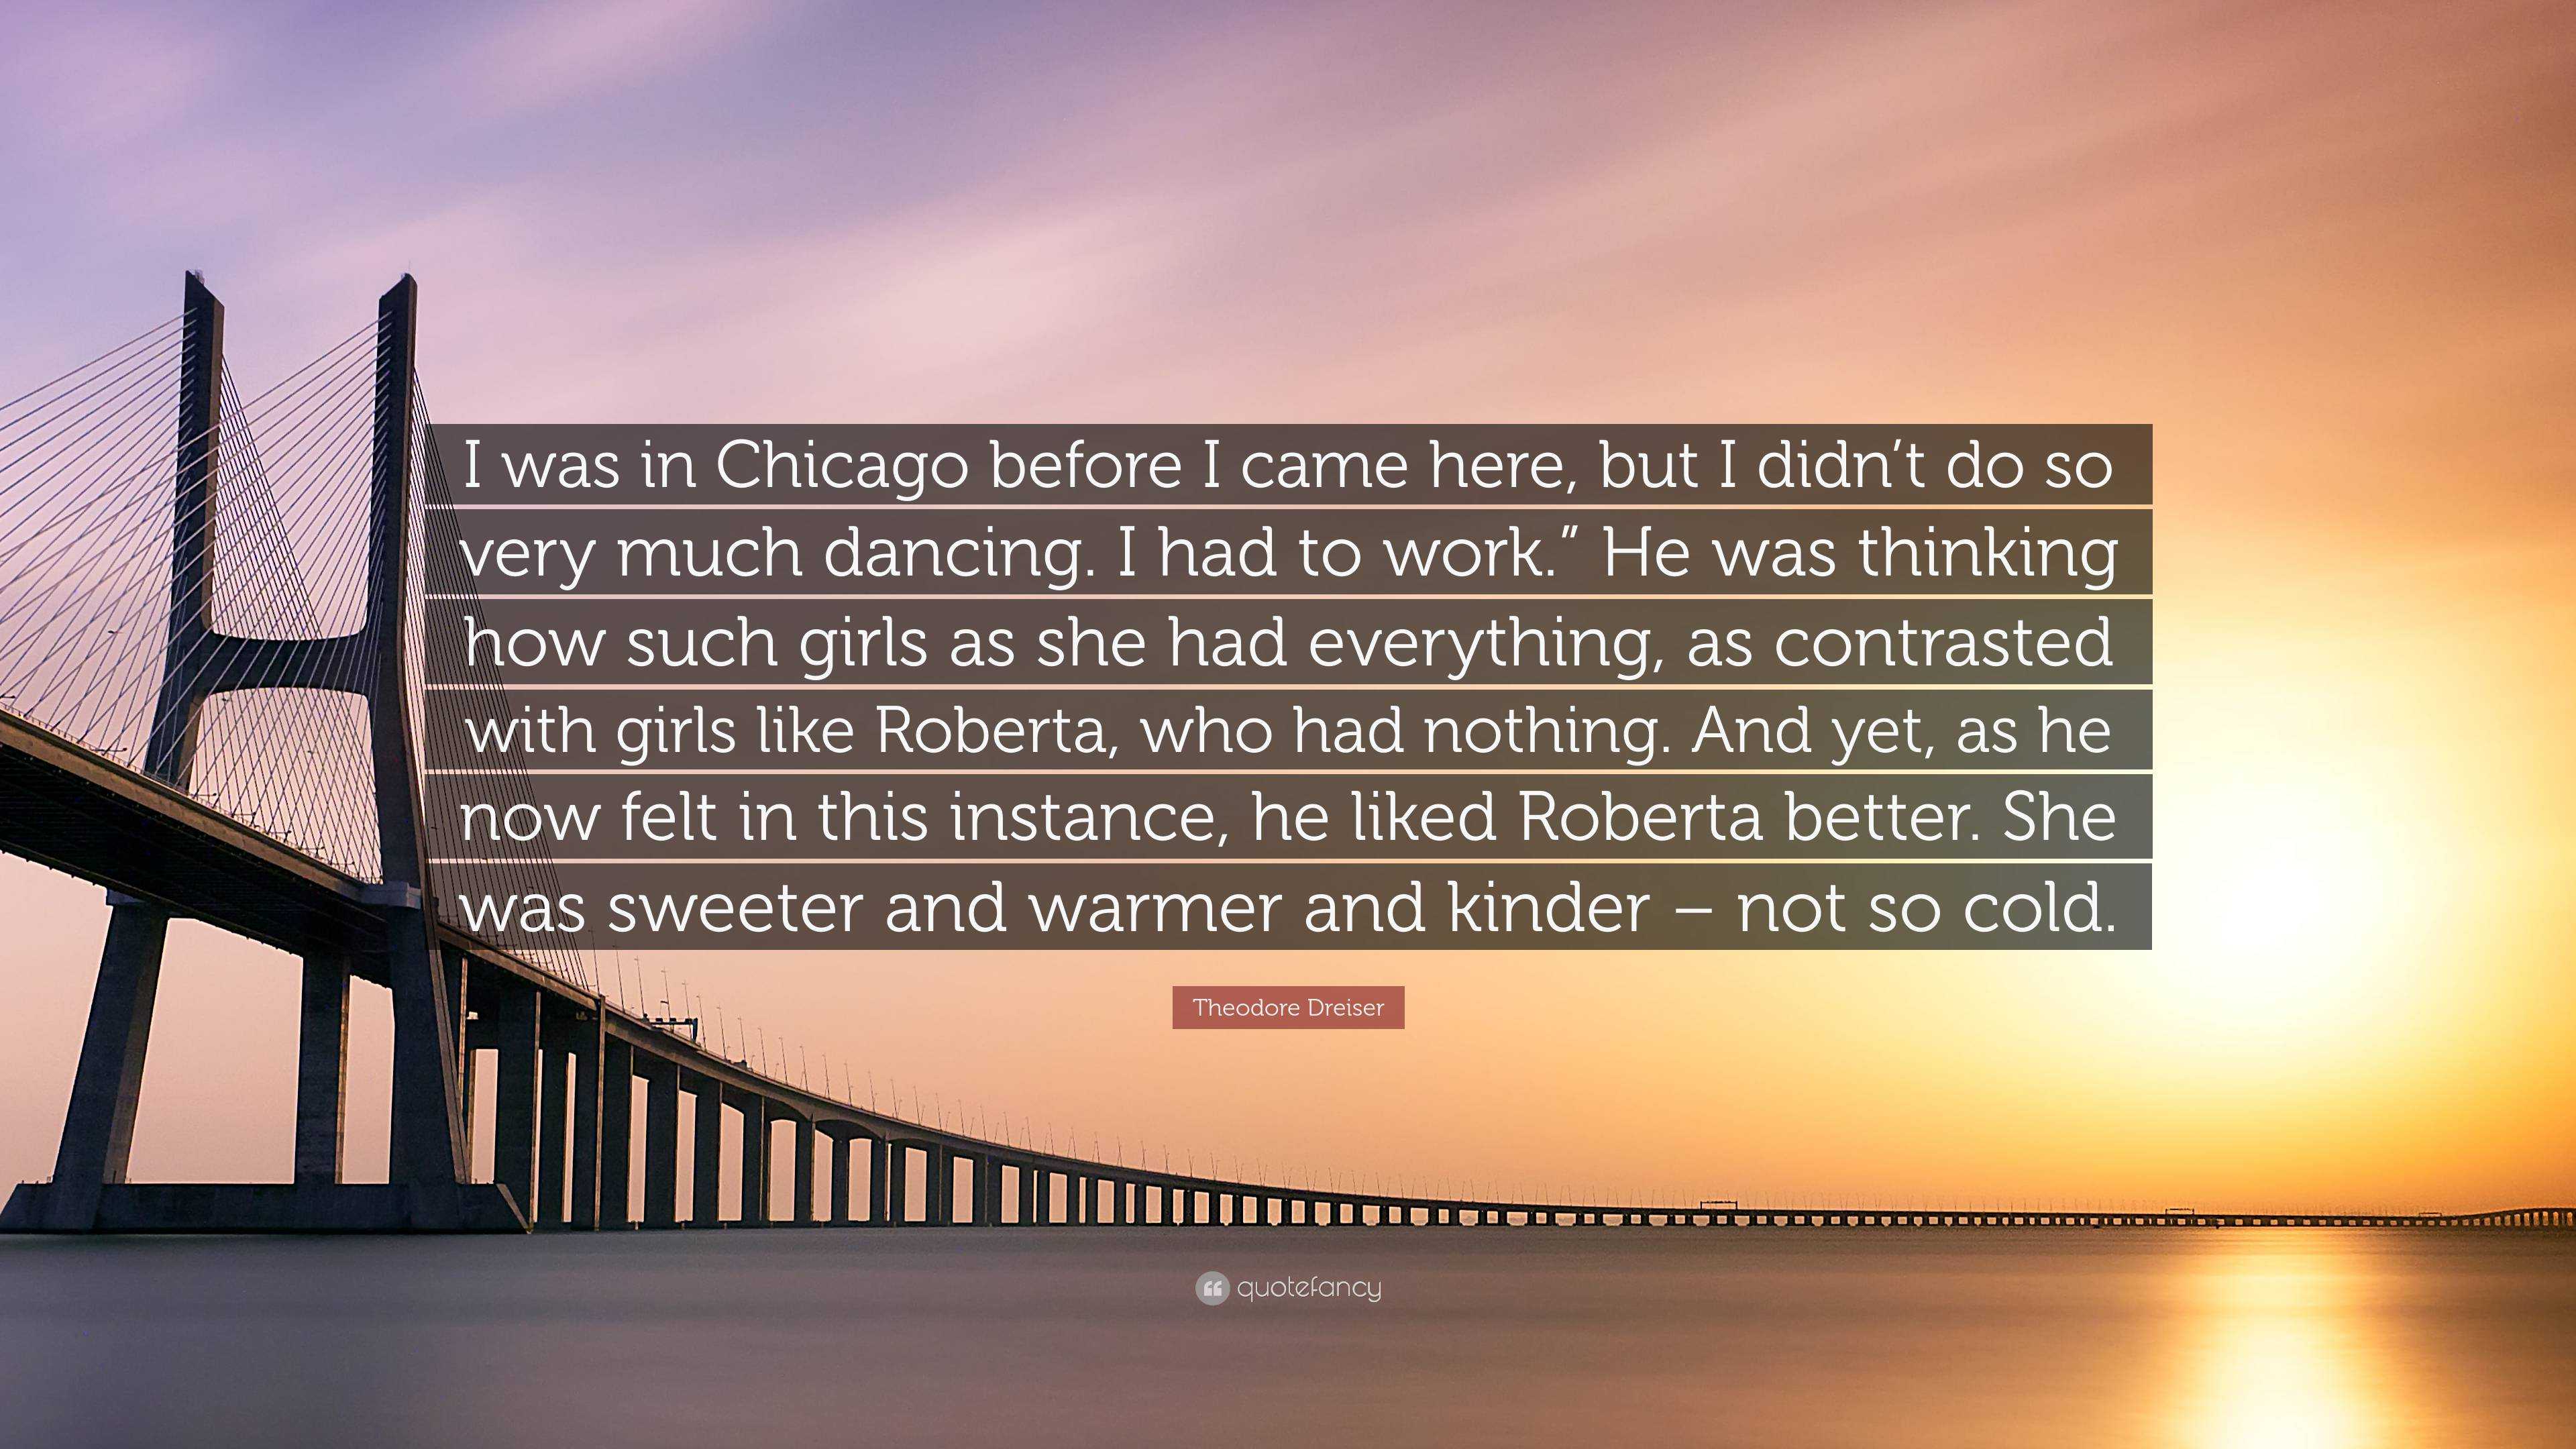 Theodore Dreiser Quote: “I was in Chicago before I came here, but I didn't  do so very much dancing. I had to work.” He was thinking how such girl”